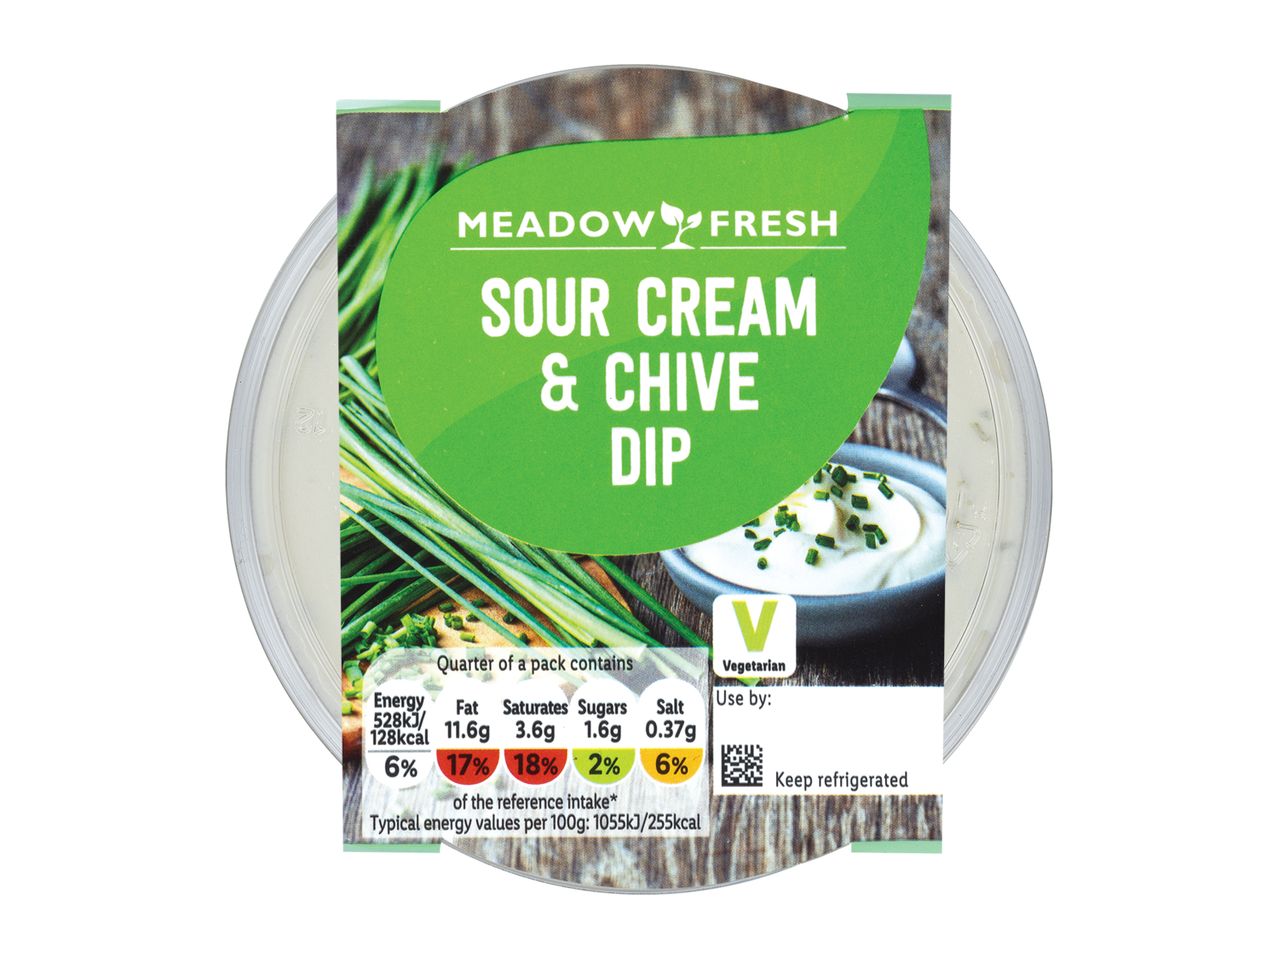 Go to full screen view: Meadow Fresh Sour Cream & Chive Dip - Image 1